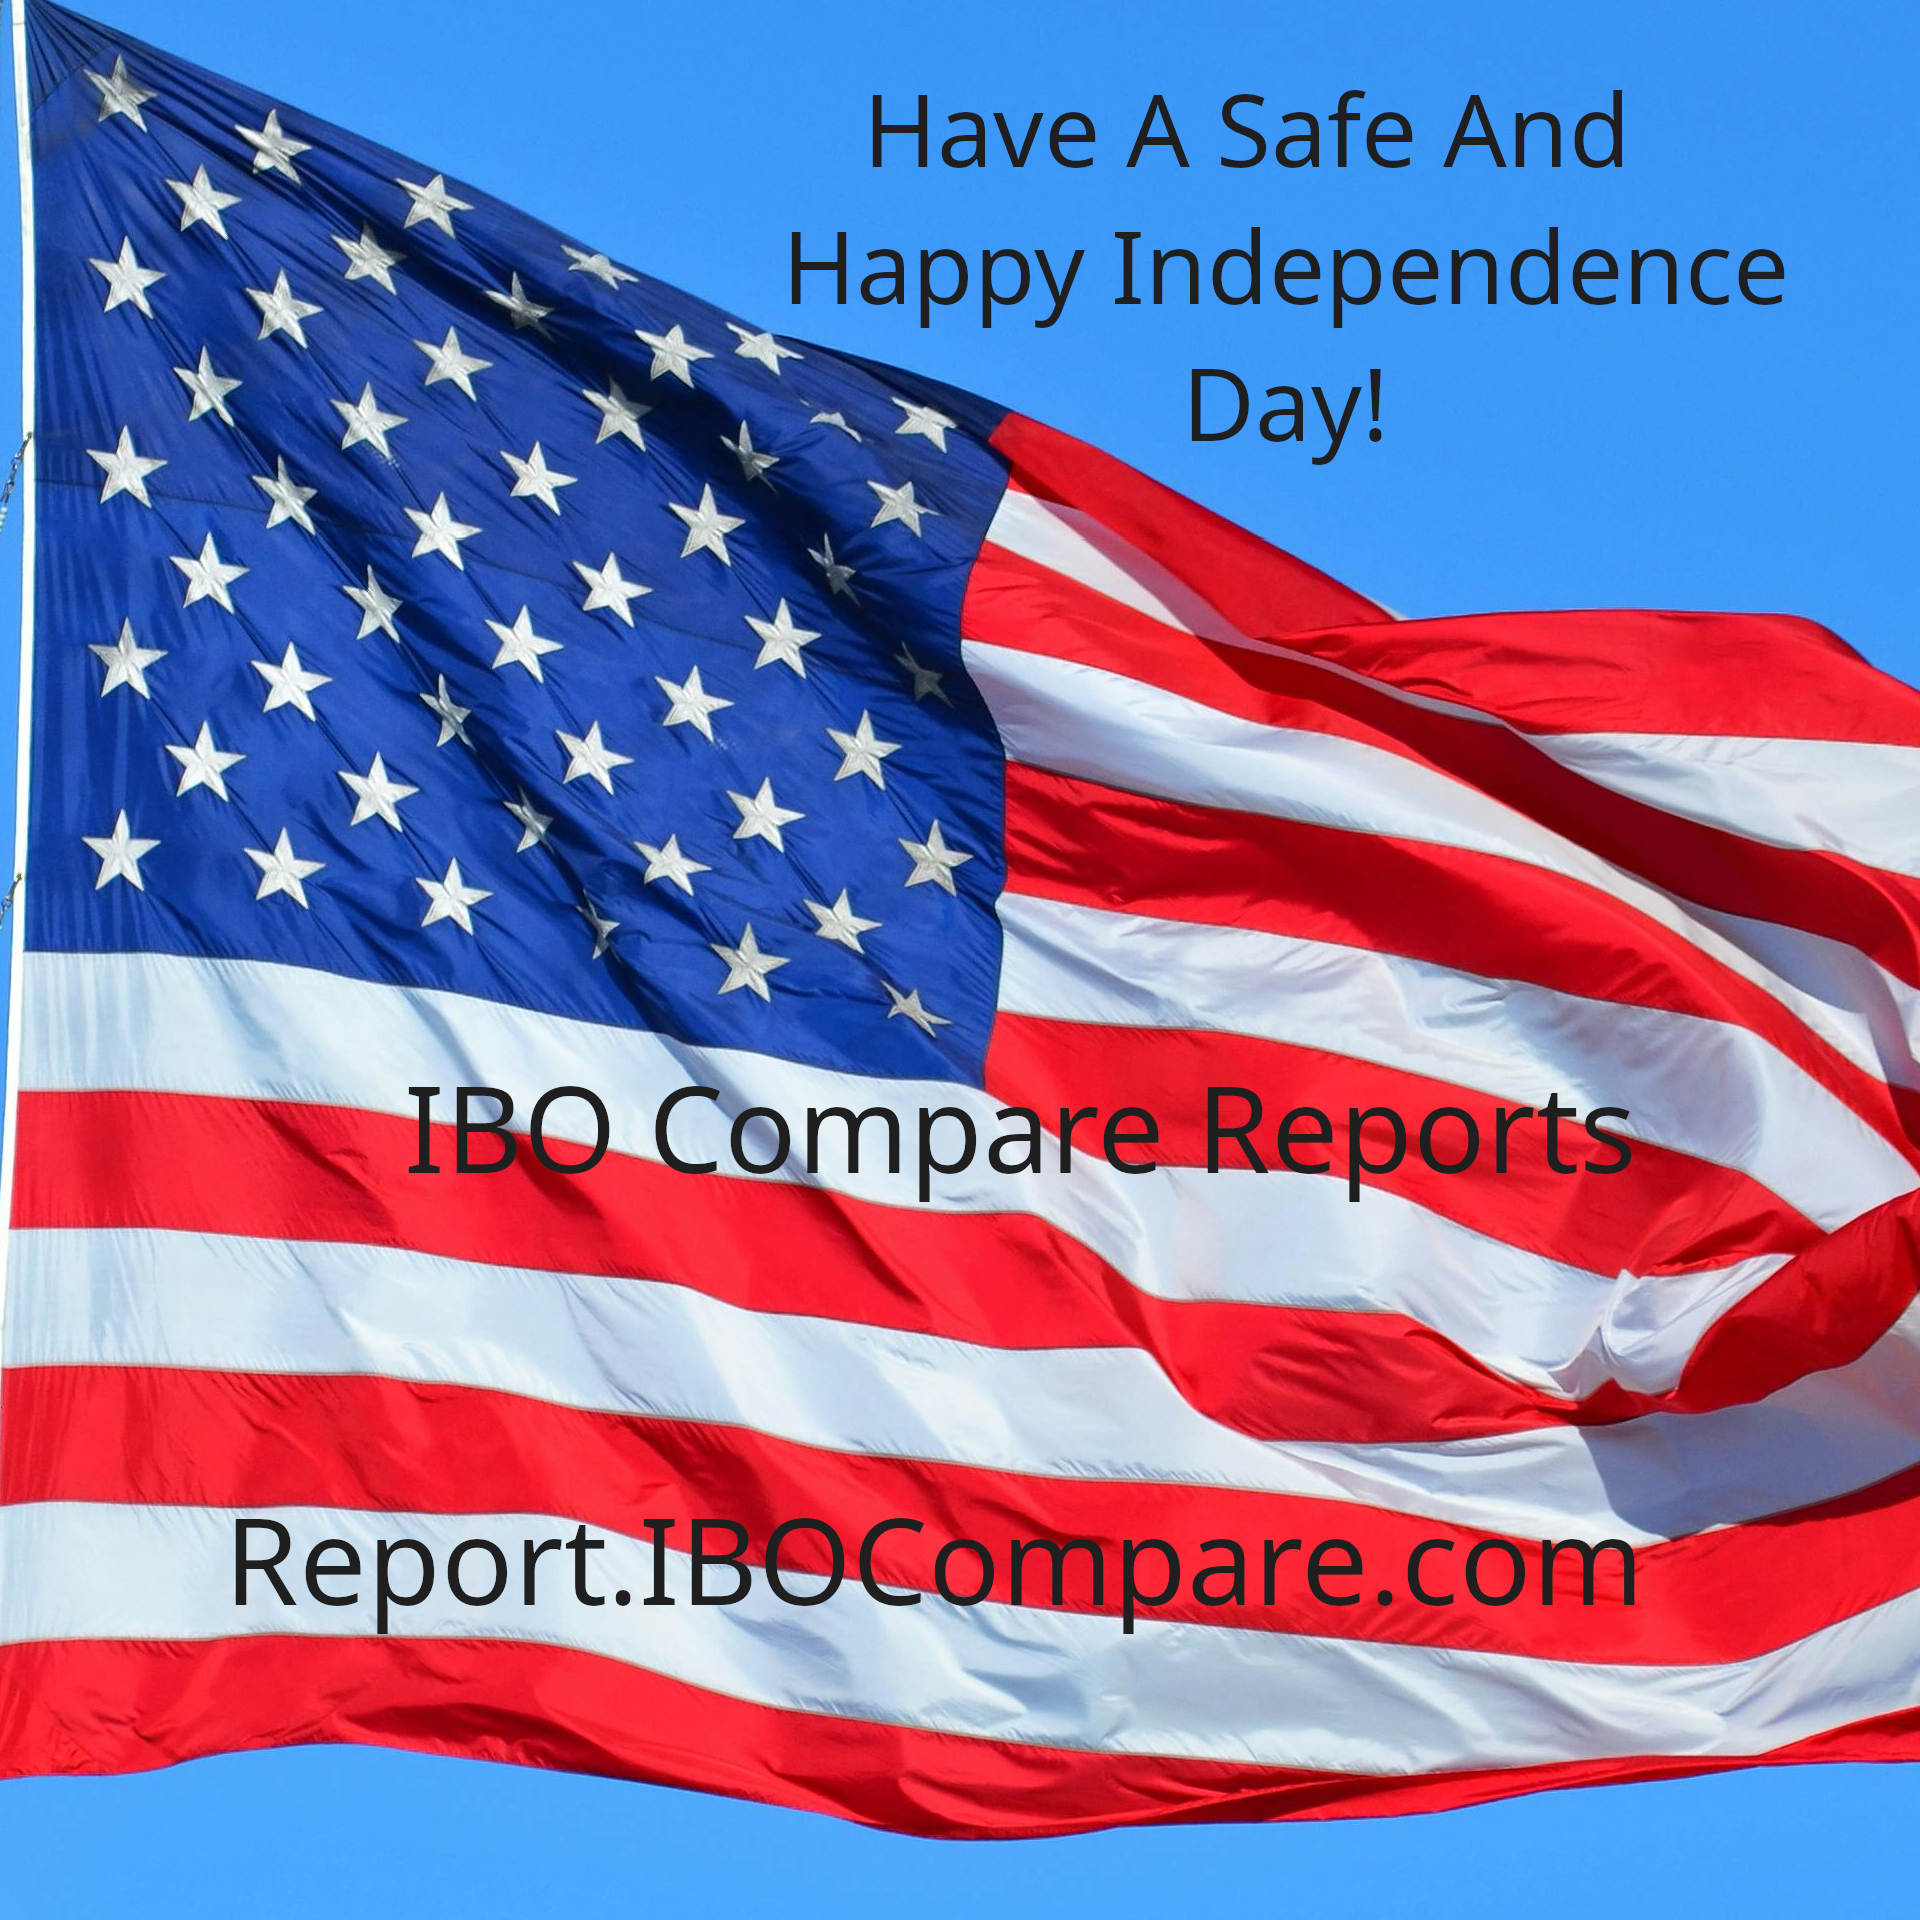 Have A Safe and Happy Independence Day!